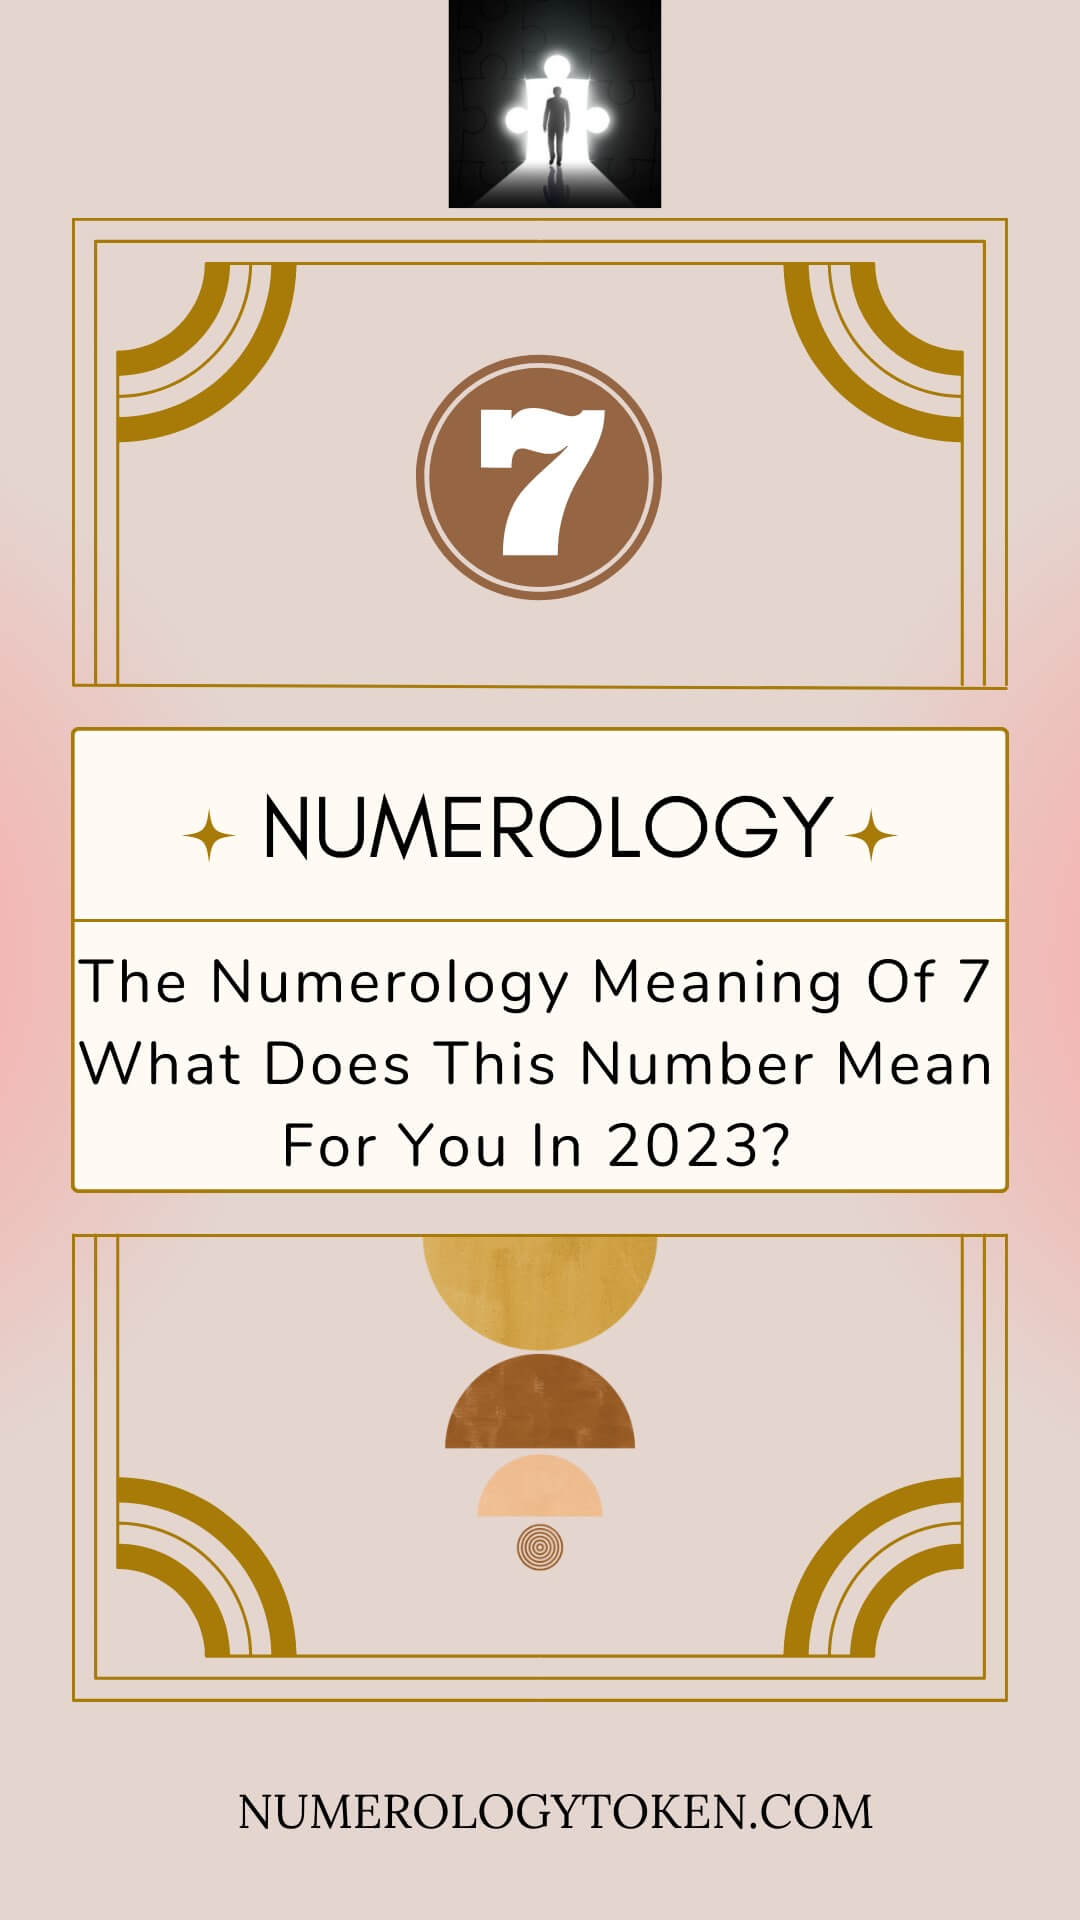 The Numerology Meaning Of 7 What Does This Number Mean For You In 2023 